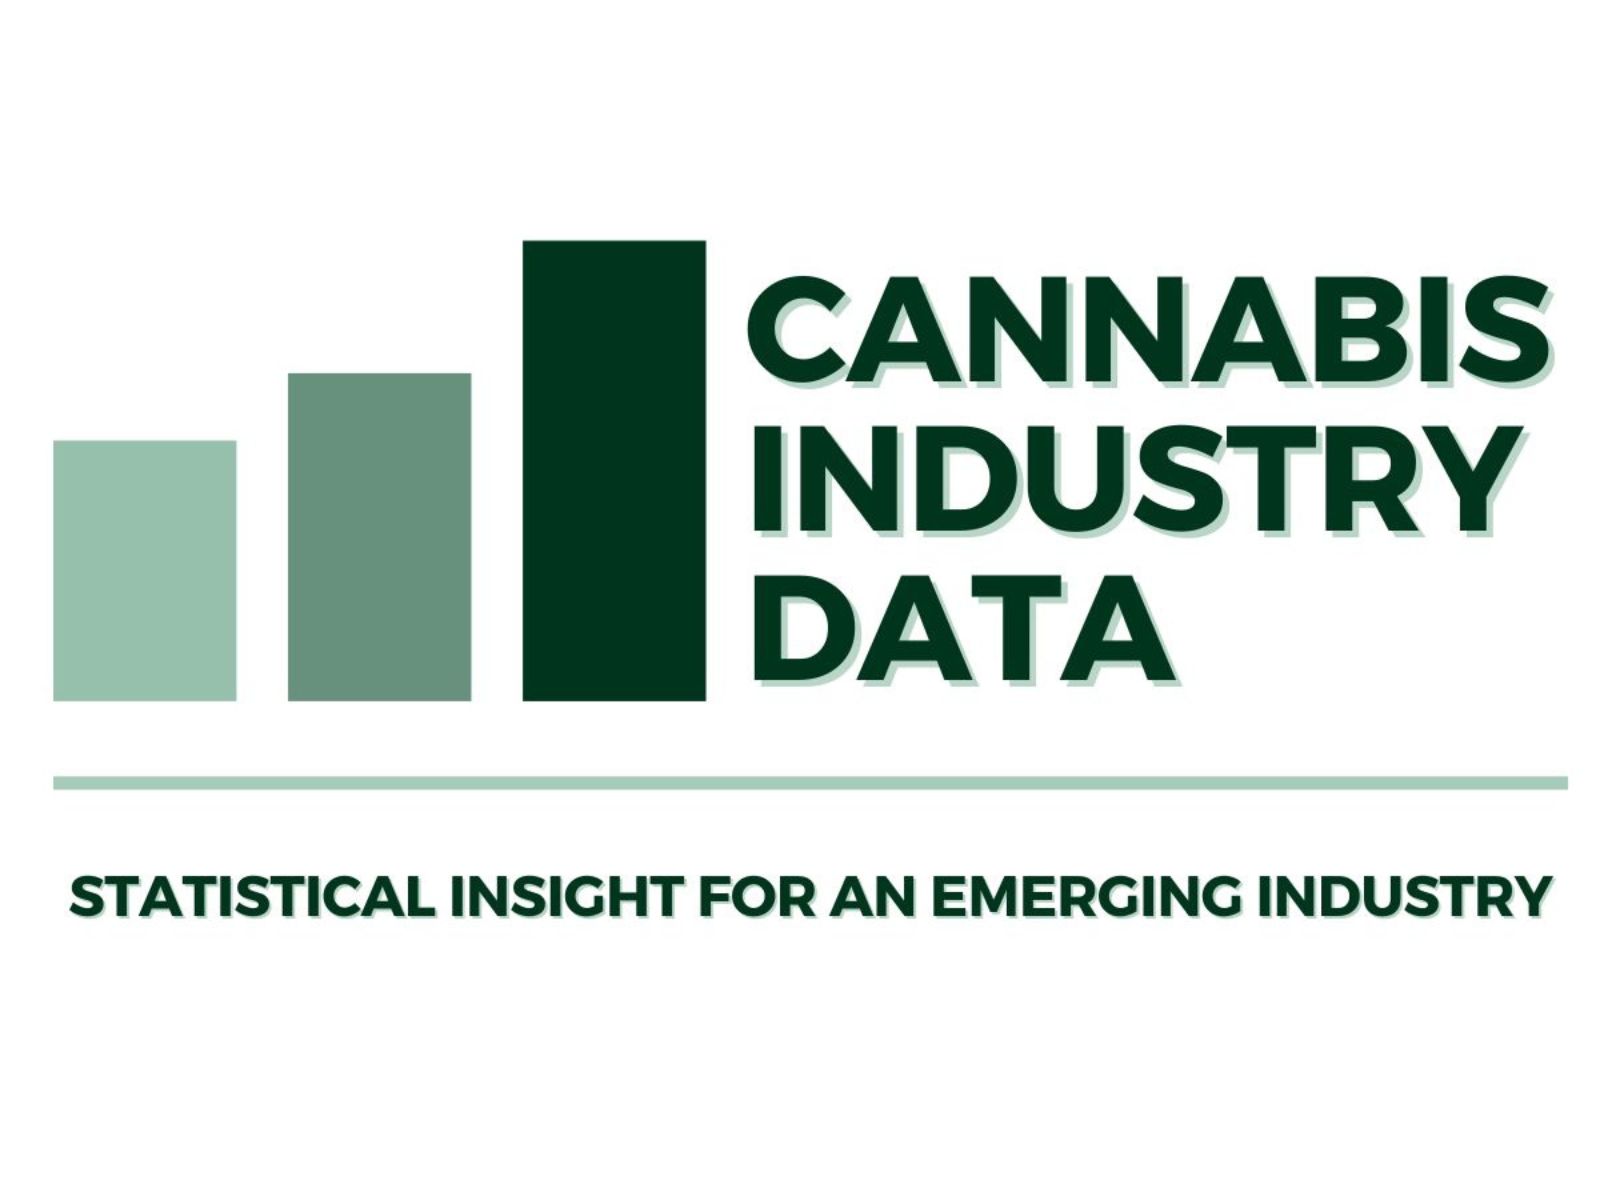 Cannabis Industry Data Wide Logo Image